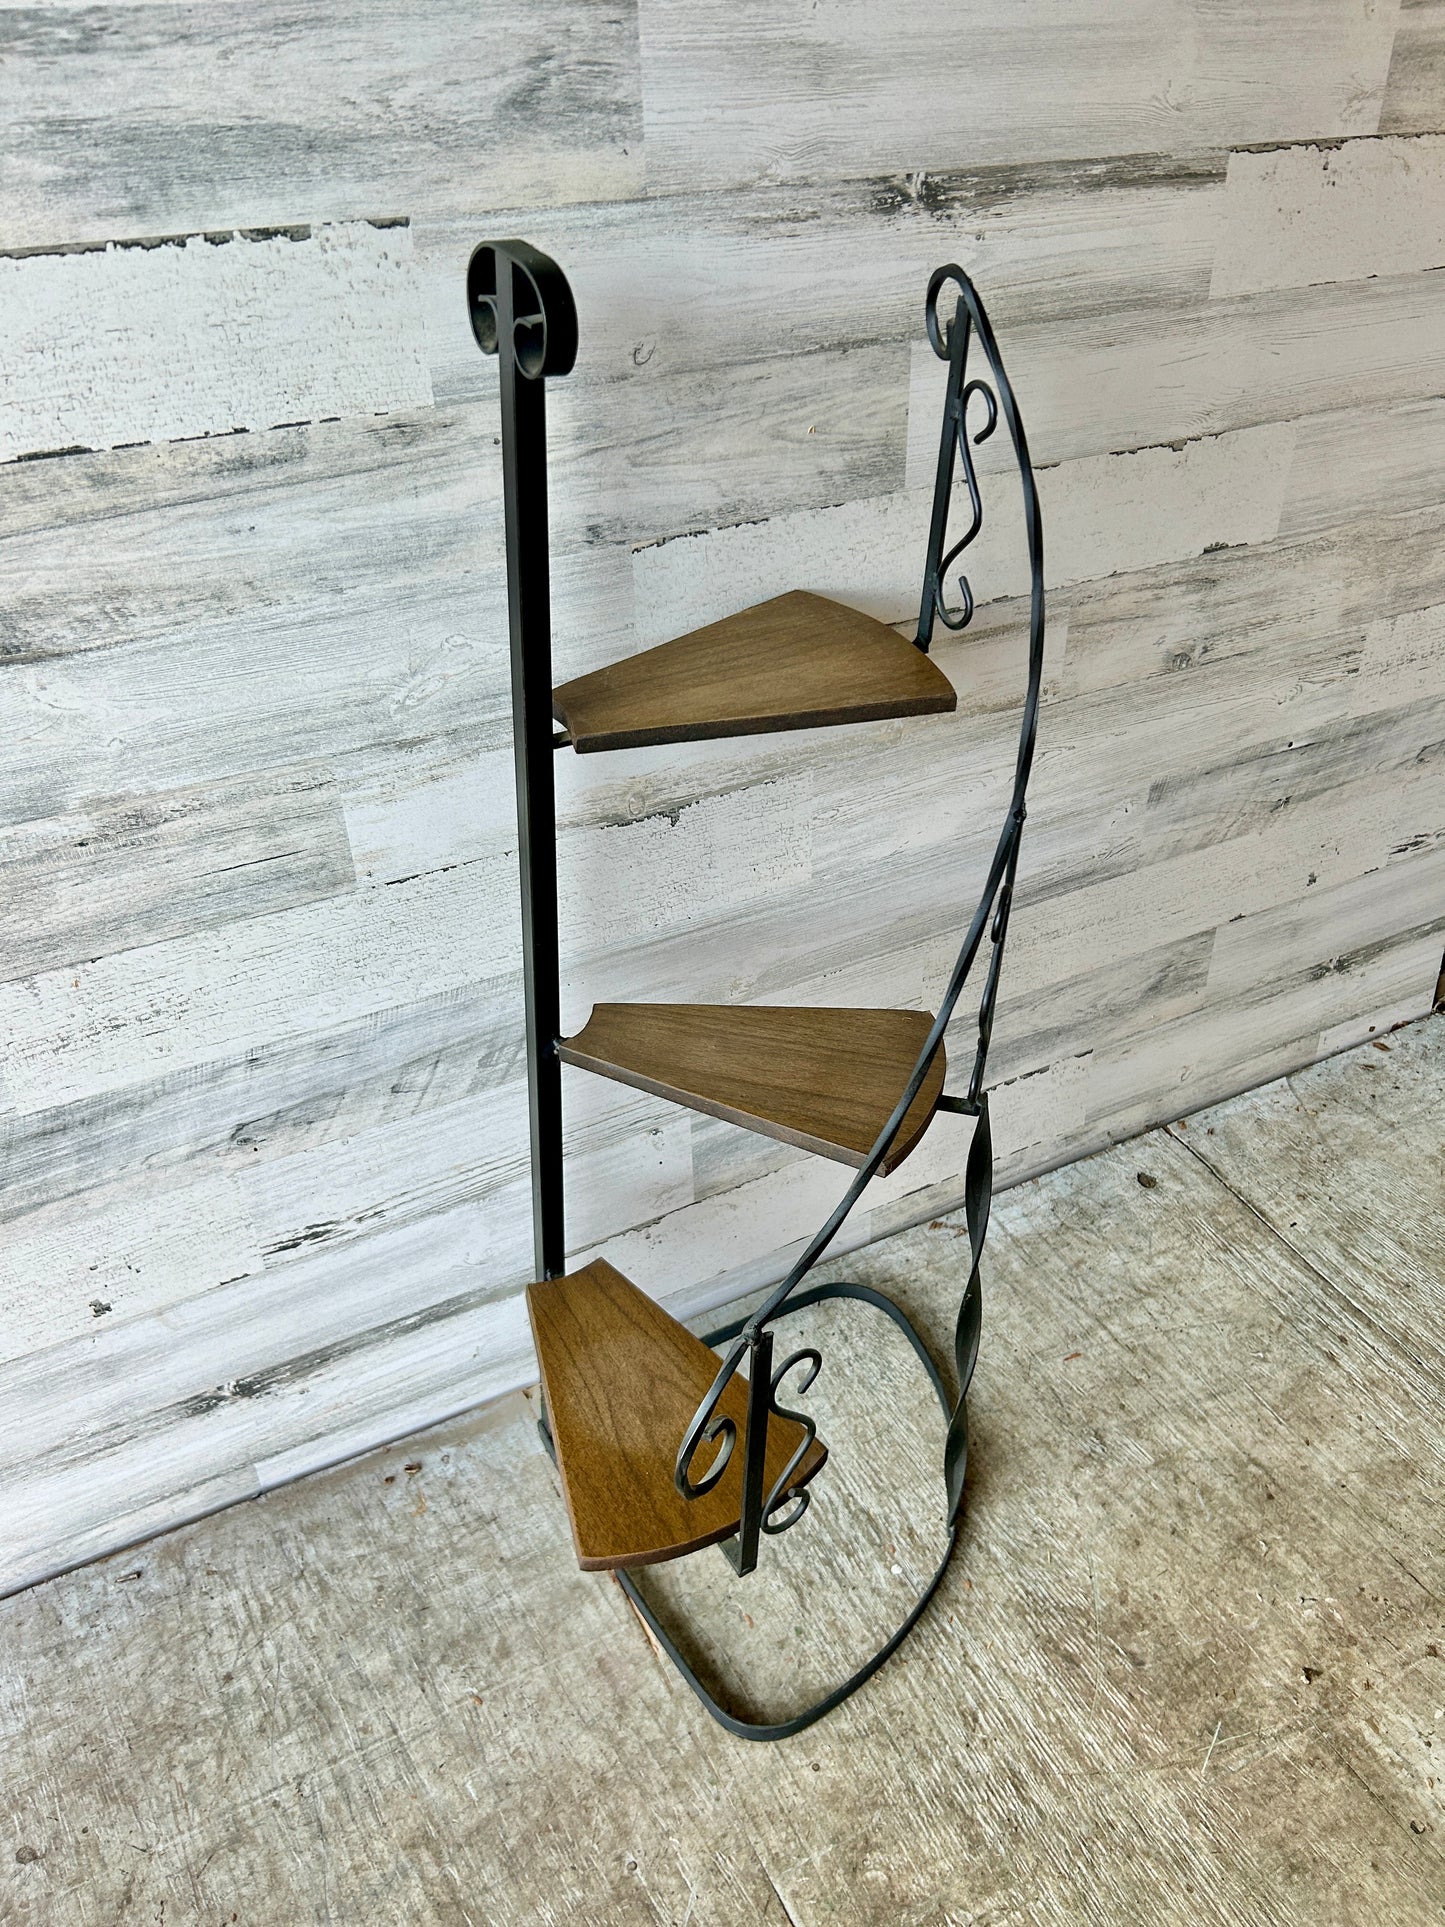 Vintage Iron Stair-step Plant Stand